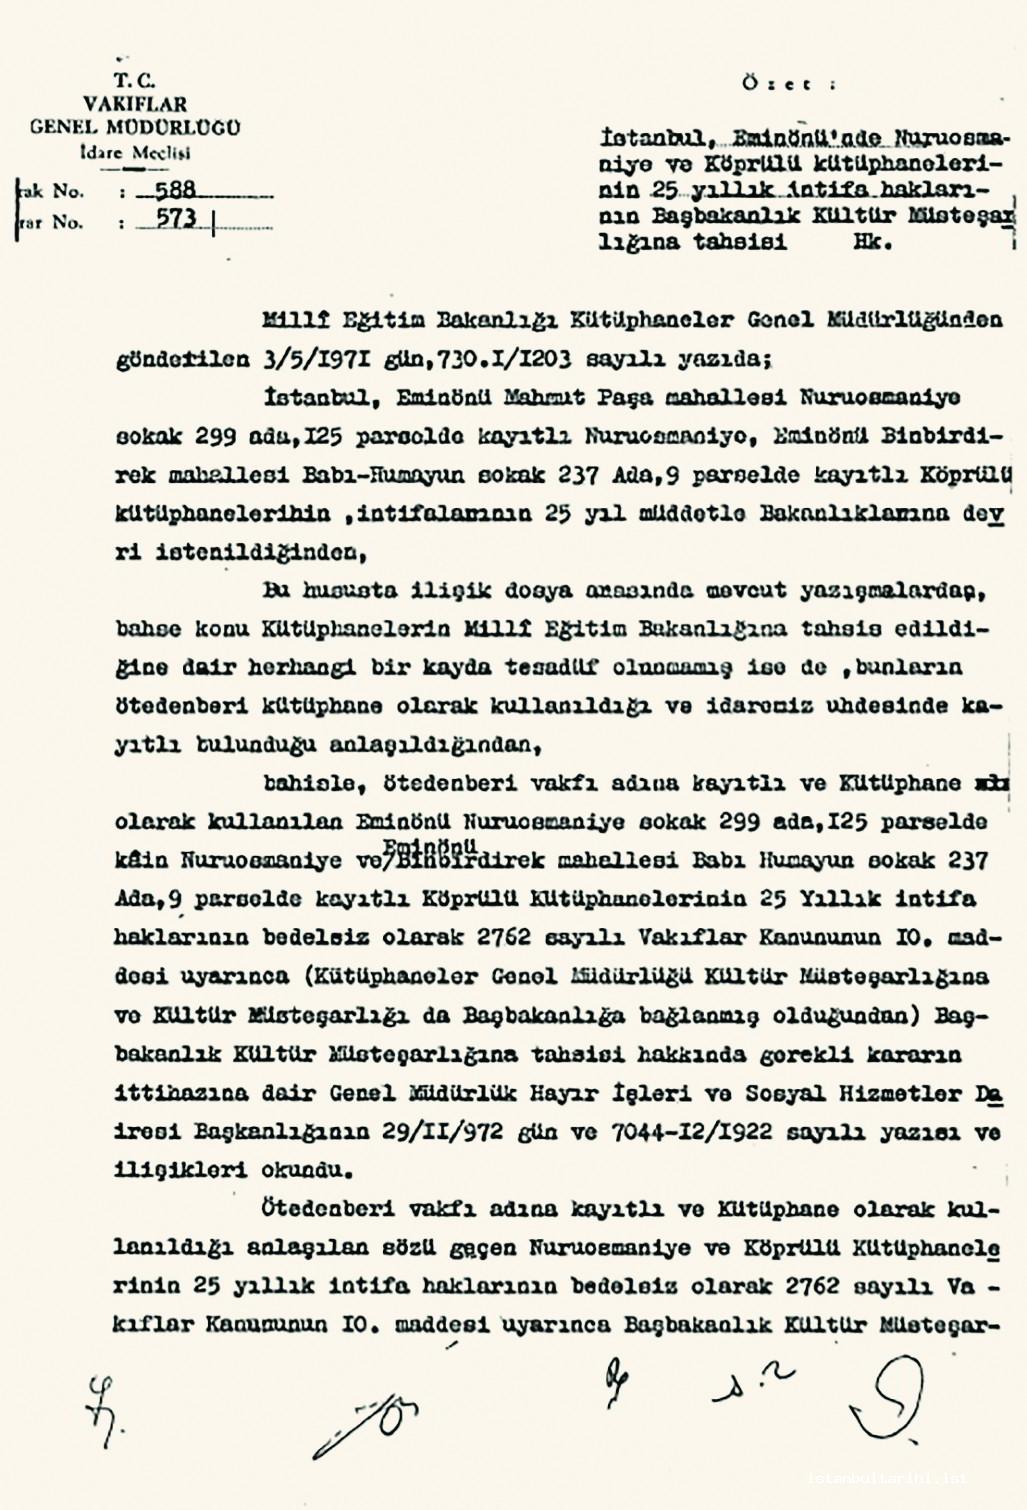 Document 2a- The decision of administrative board of the Directorate General of Foundations about the designation of Nuruosmaniye and Köprülü Libraries